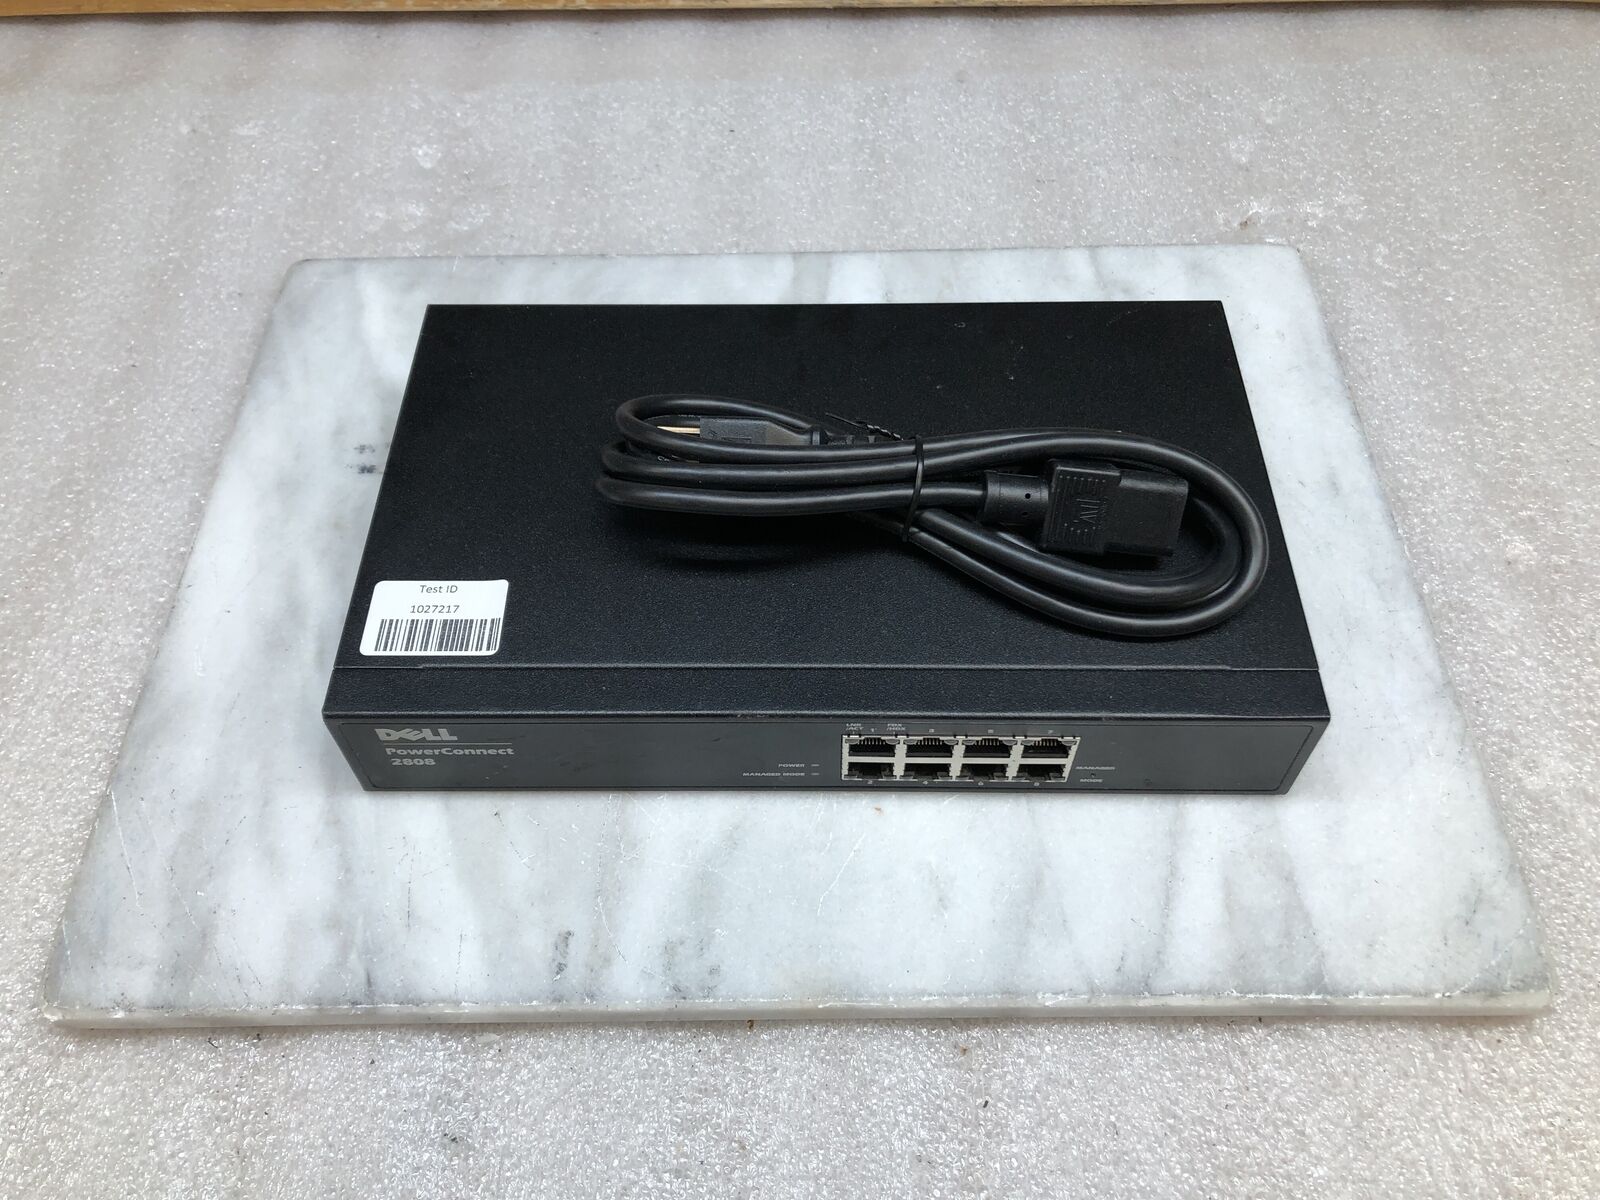 Dell PowerConnect 2808 8-Port Eth 10/100/1000 Gigabit Network Switch TESTED